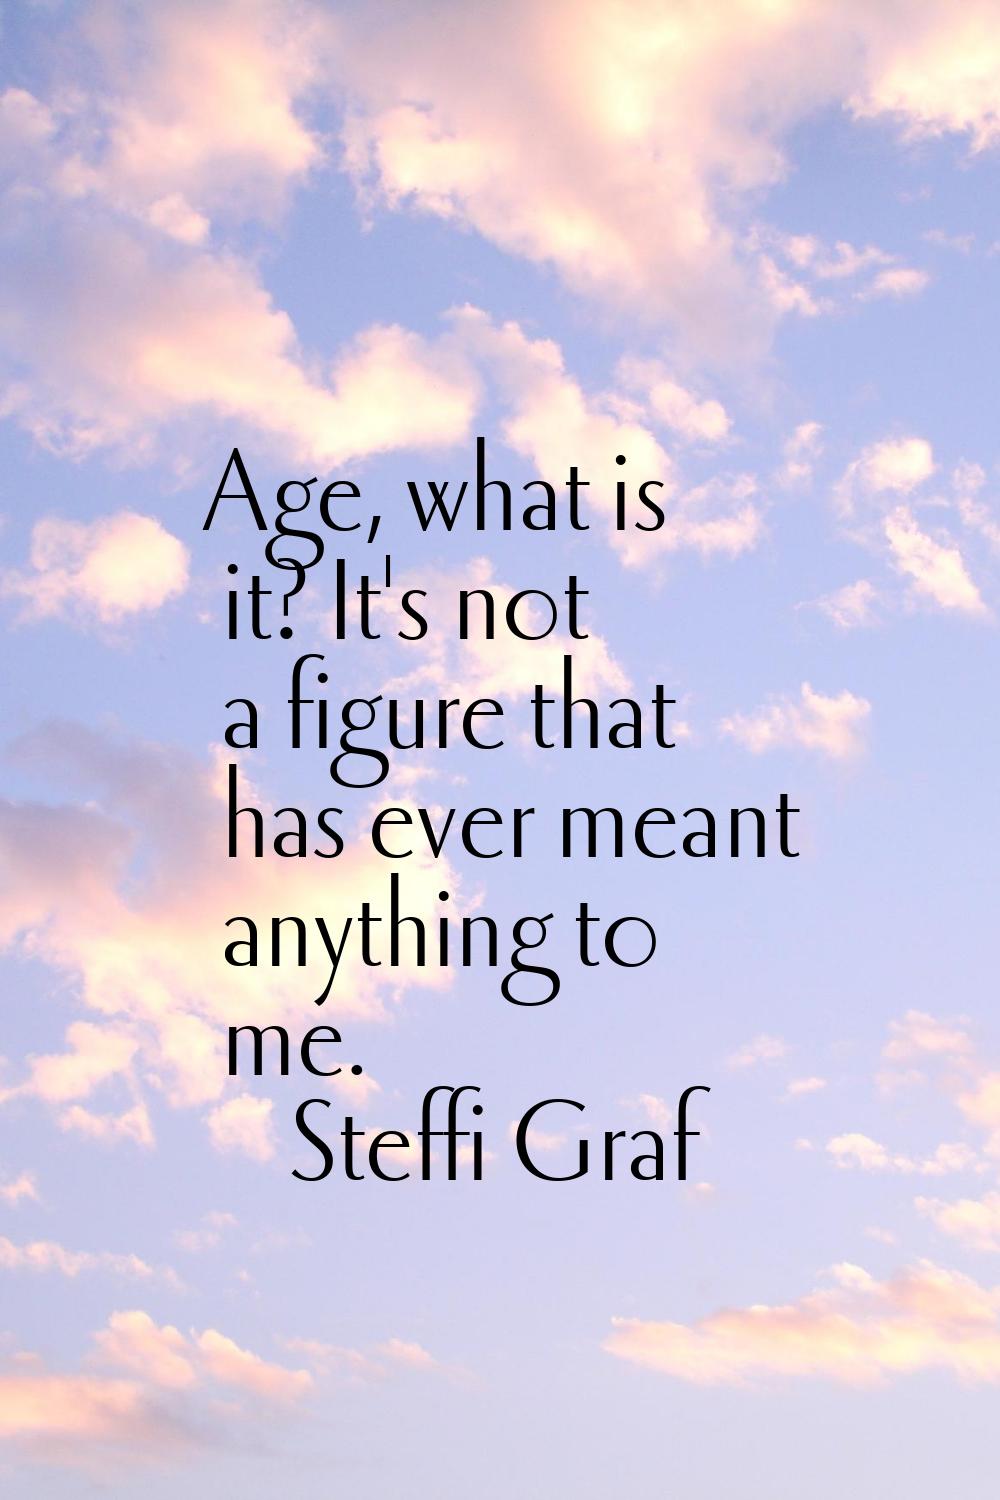 Age, what is it? It's not a figure that has ever meant anything to me.